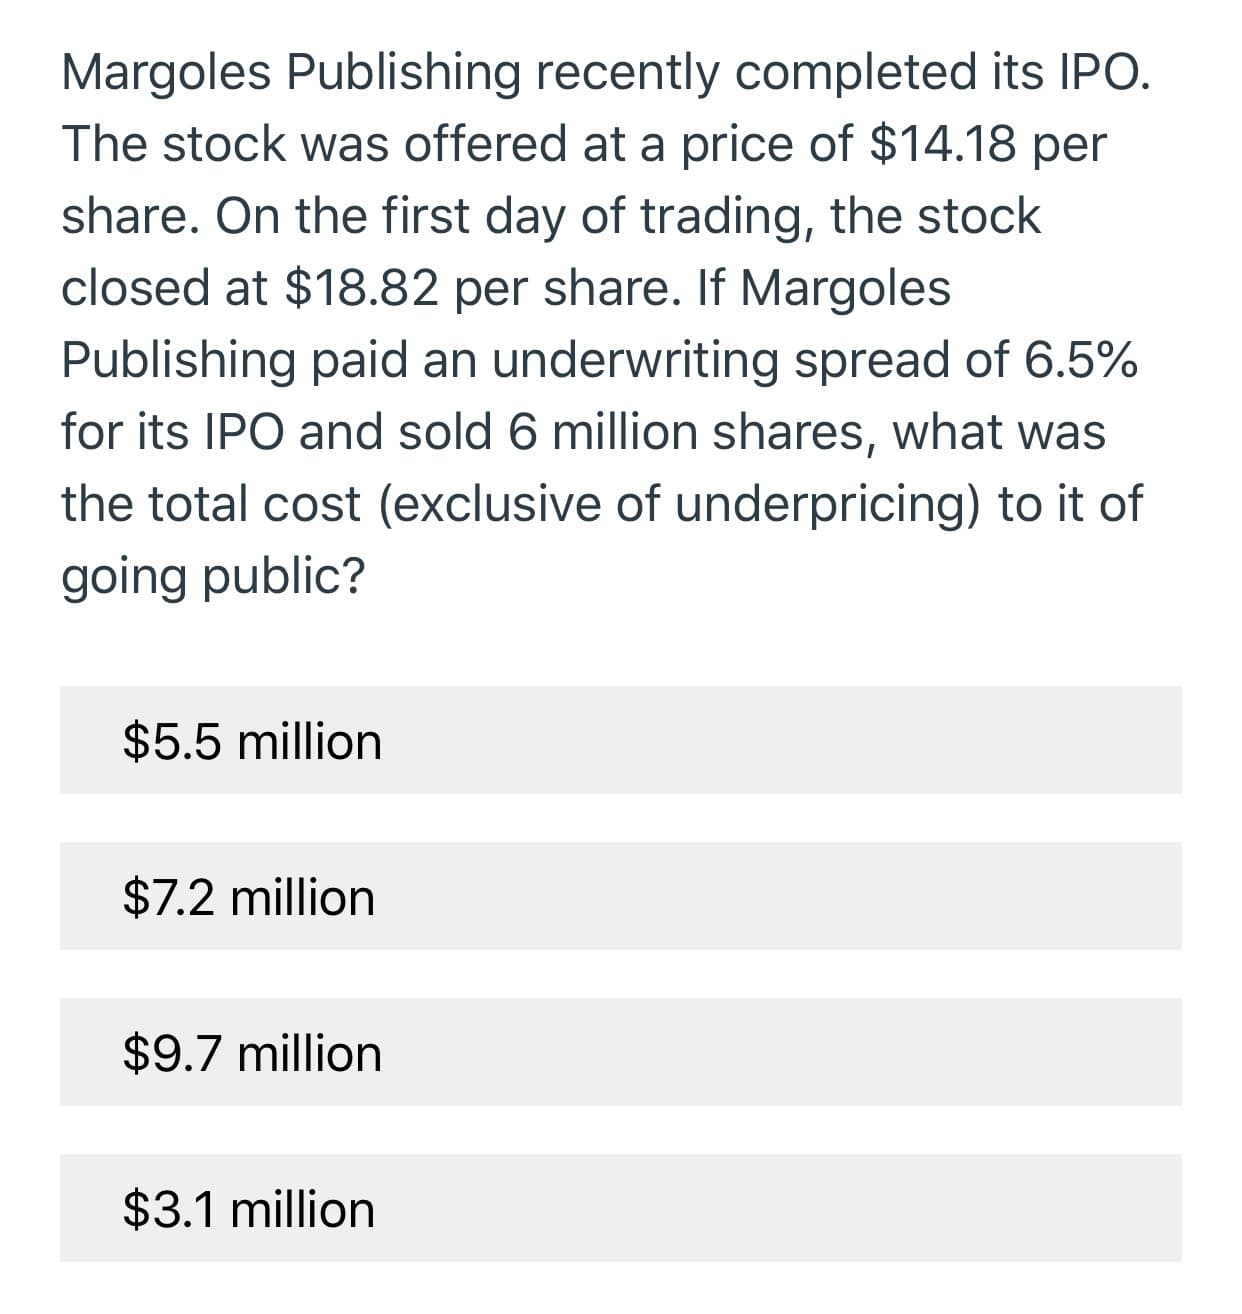 Margoles Publishing recently completed its IPO.
The stock was offered at a price of $14.18 per
share. On the first day of trading, the stock
closed at $18.82 per share. If Margoles
Publishing paid an underwriting spread of 6.5%
for its IPO and sold 6 million shares, what was
the total cost (exclusive of underpricing) to it of
going public?
$5.5 million
$7.2 million
$9.7 million
$3.1 million
